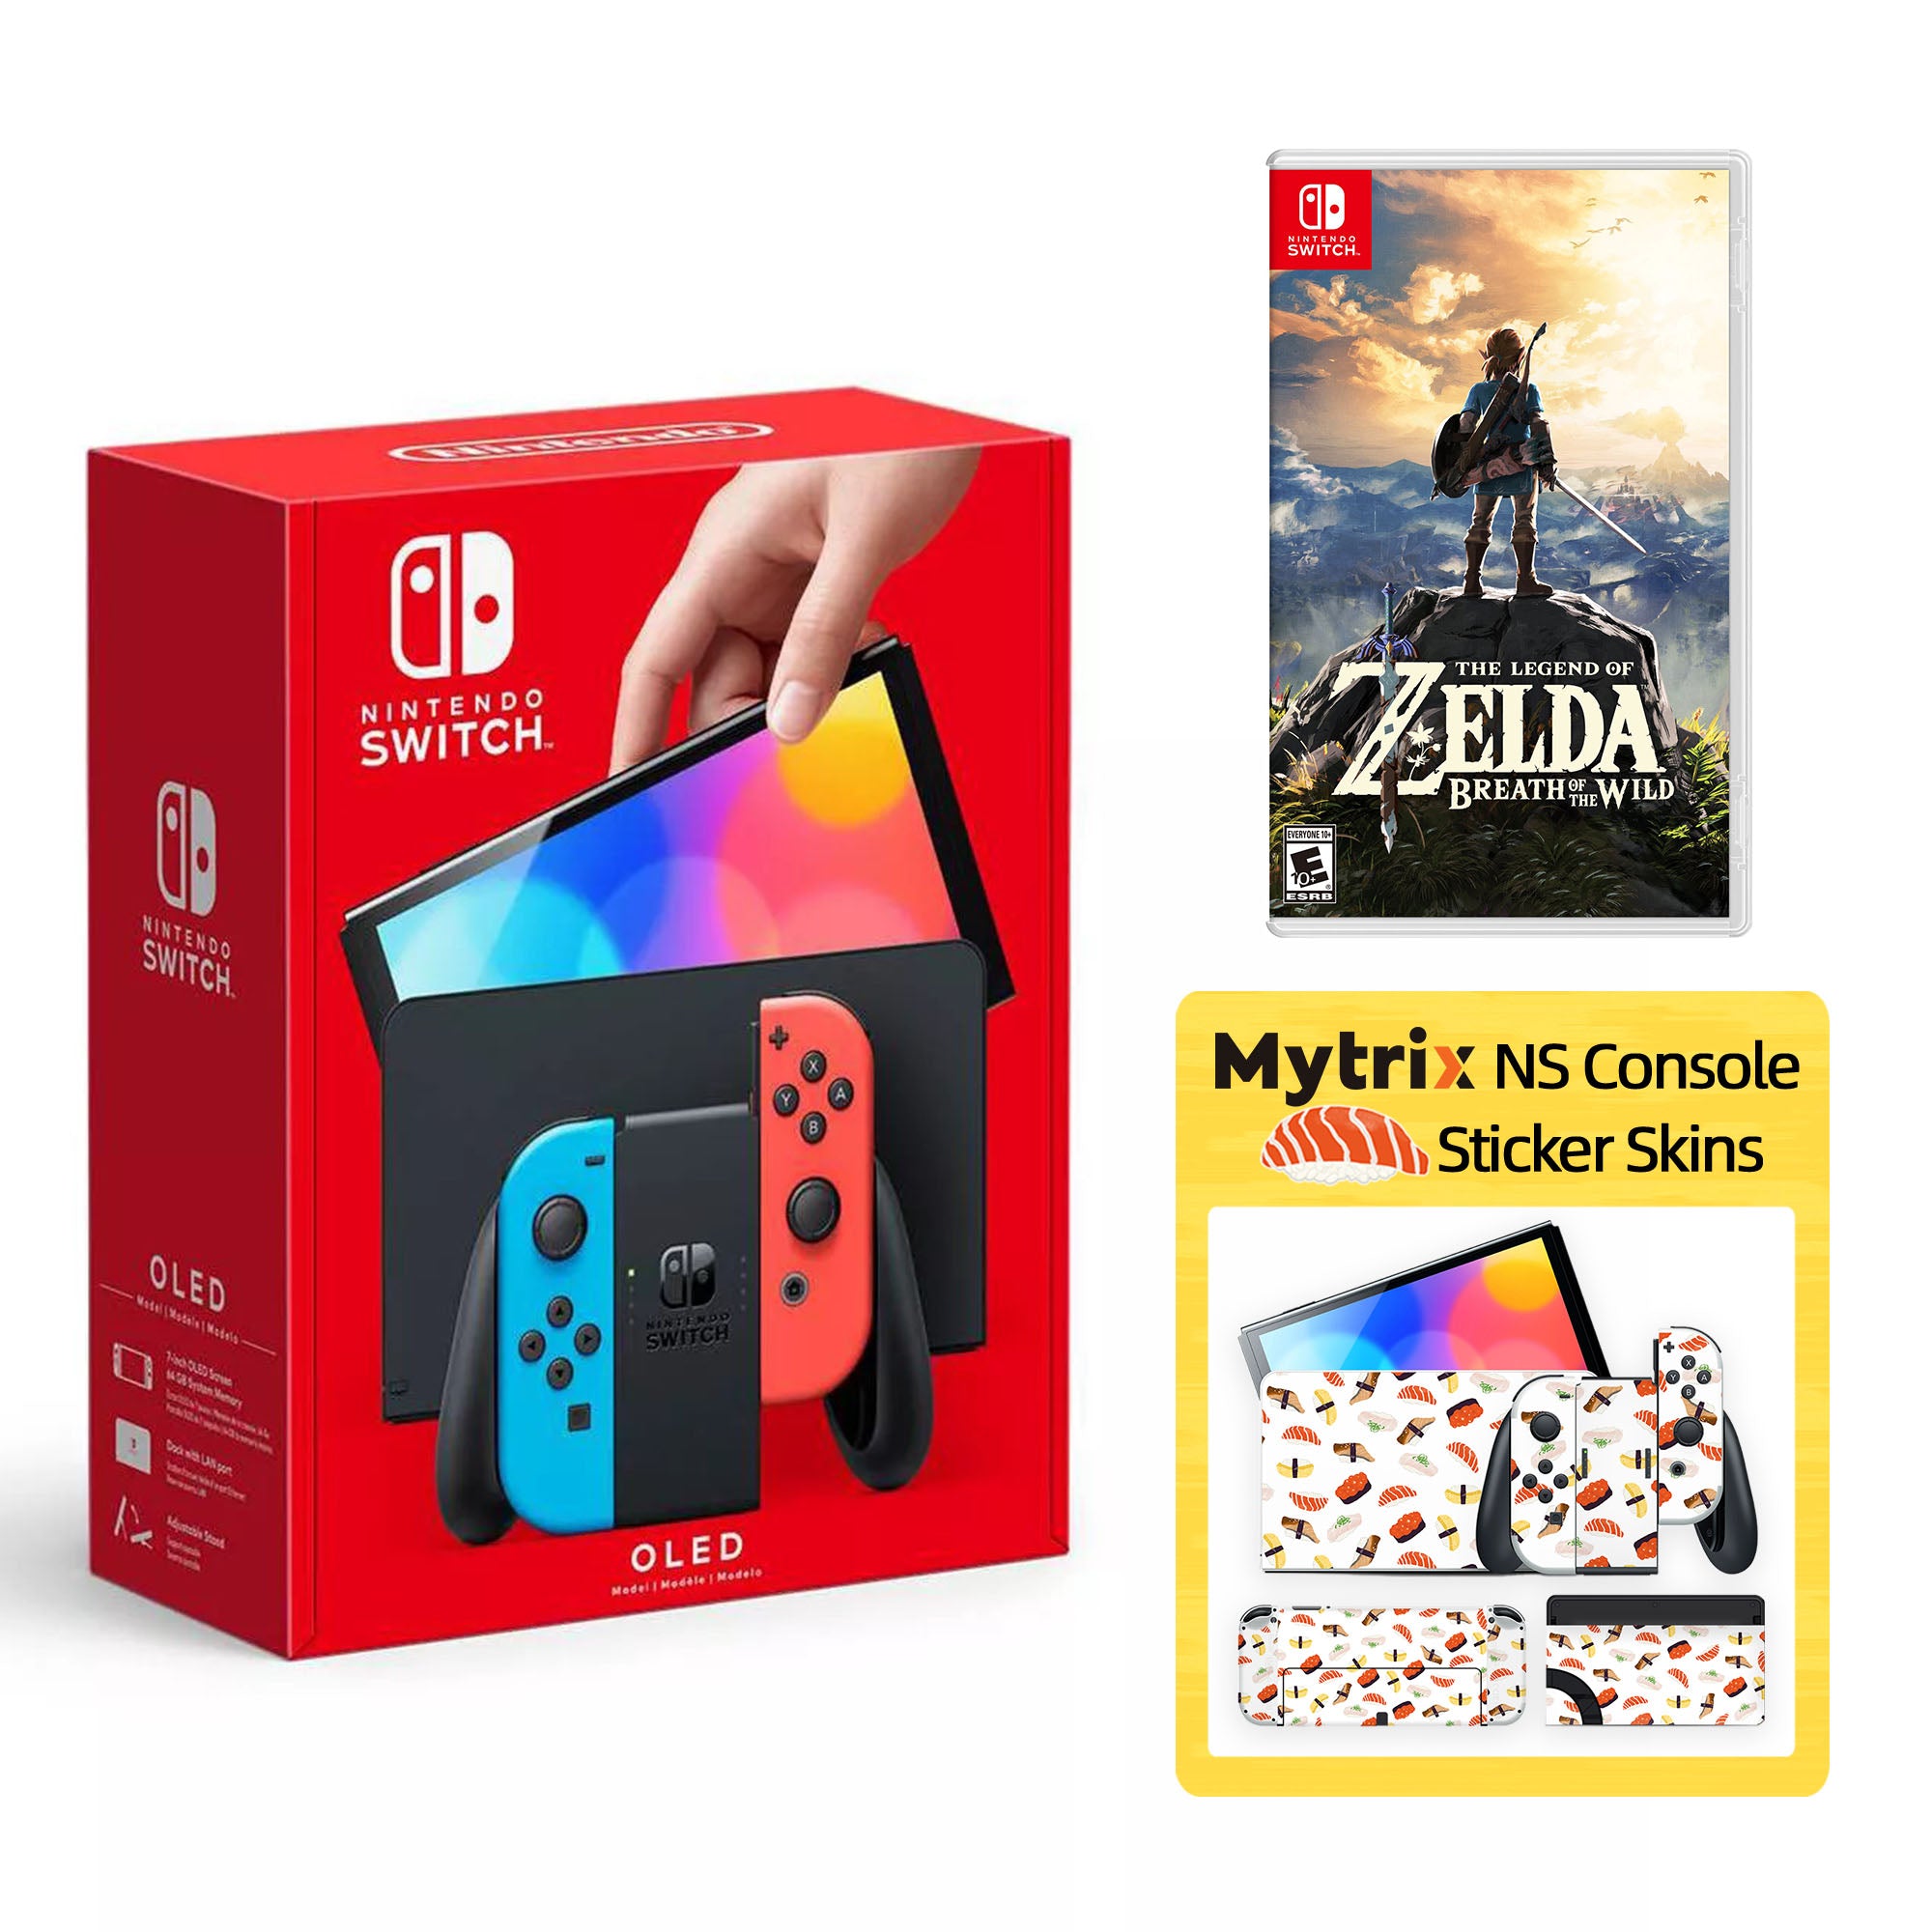 2022 New Nintendo Switch OLED Model Neon Red Blue with The Legend of Zelda: Breath of the Wild and Mytrix Full Body Skin Sticker for NS OLED Console, Dock and Joycons - Sushi Set